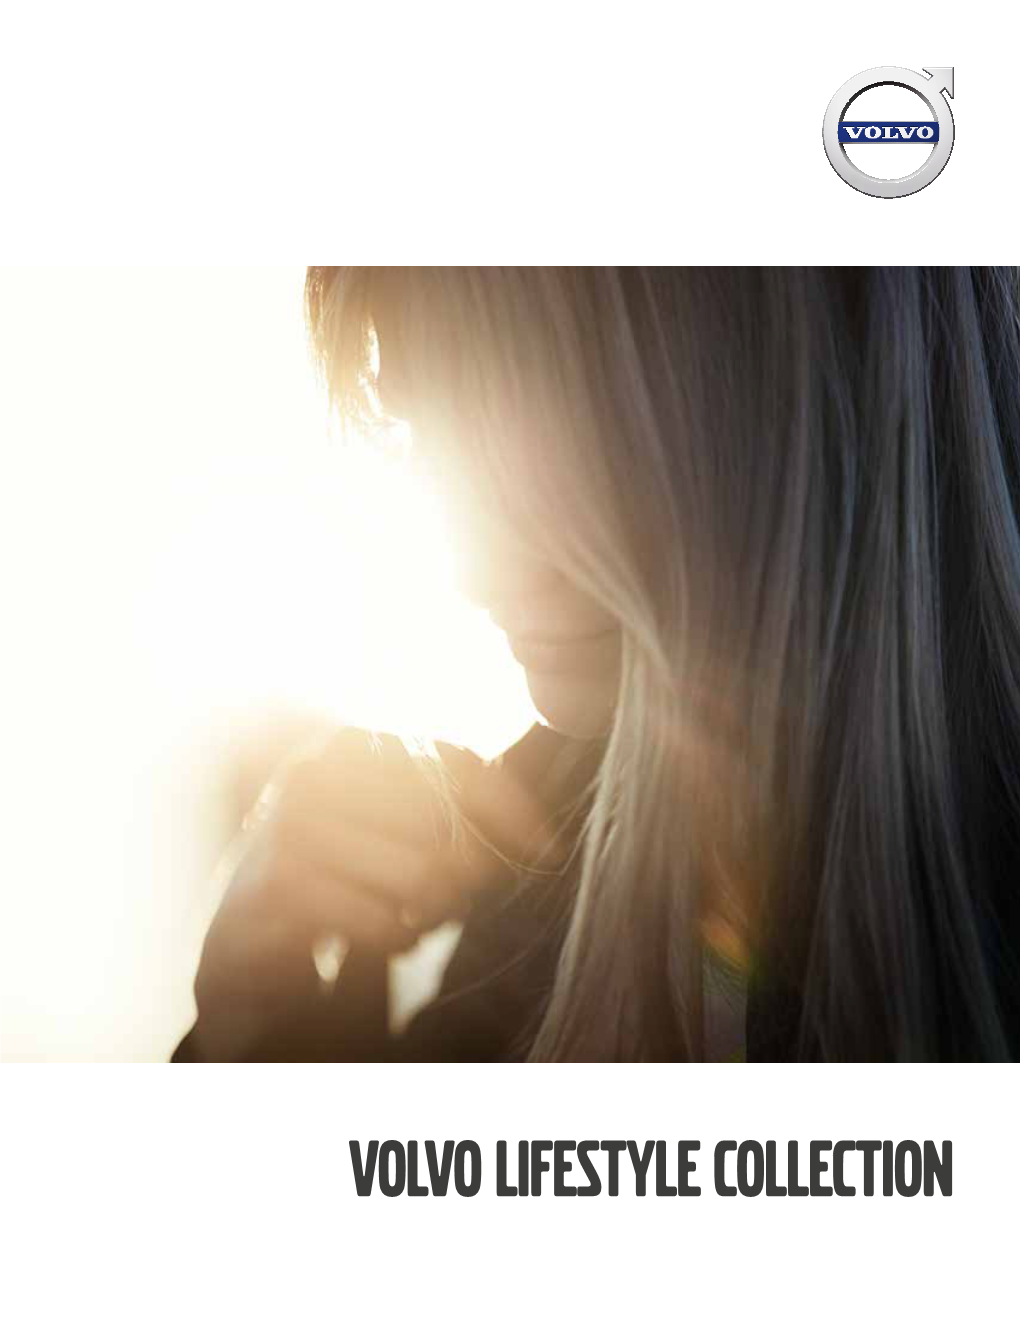 VOLVO Lifestyle Collection WELCOME to the VOLVO COLLECTION